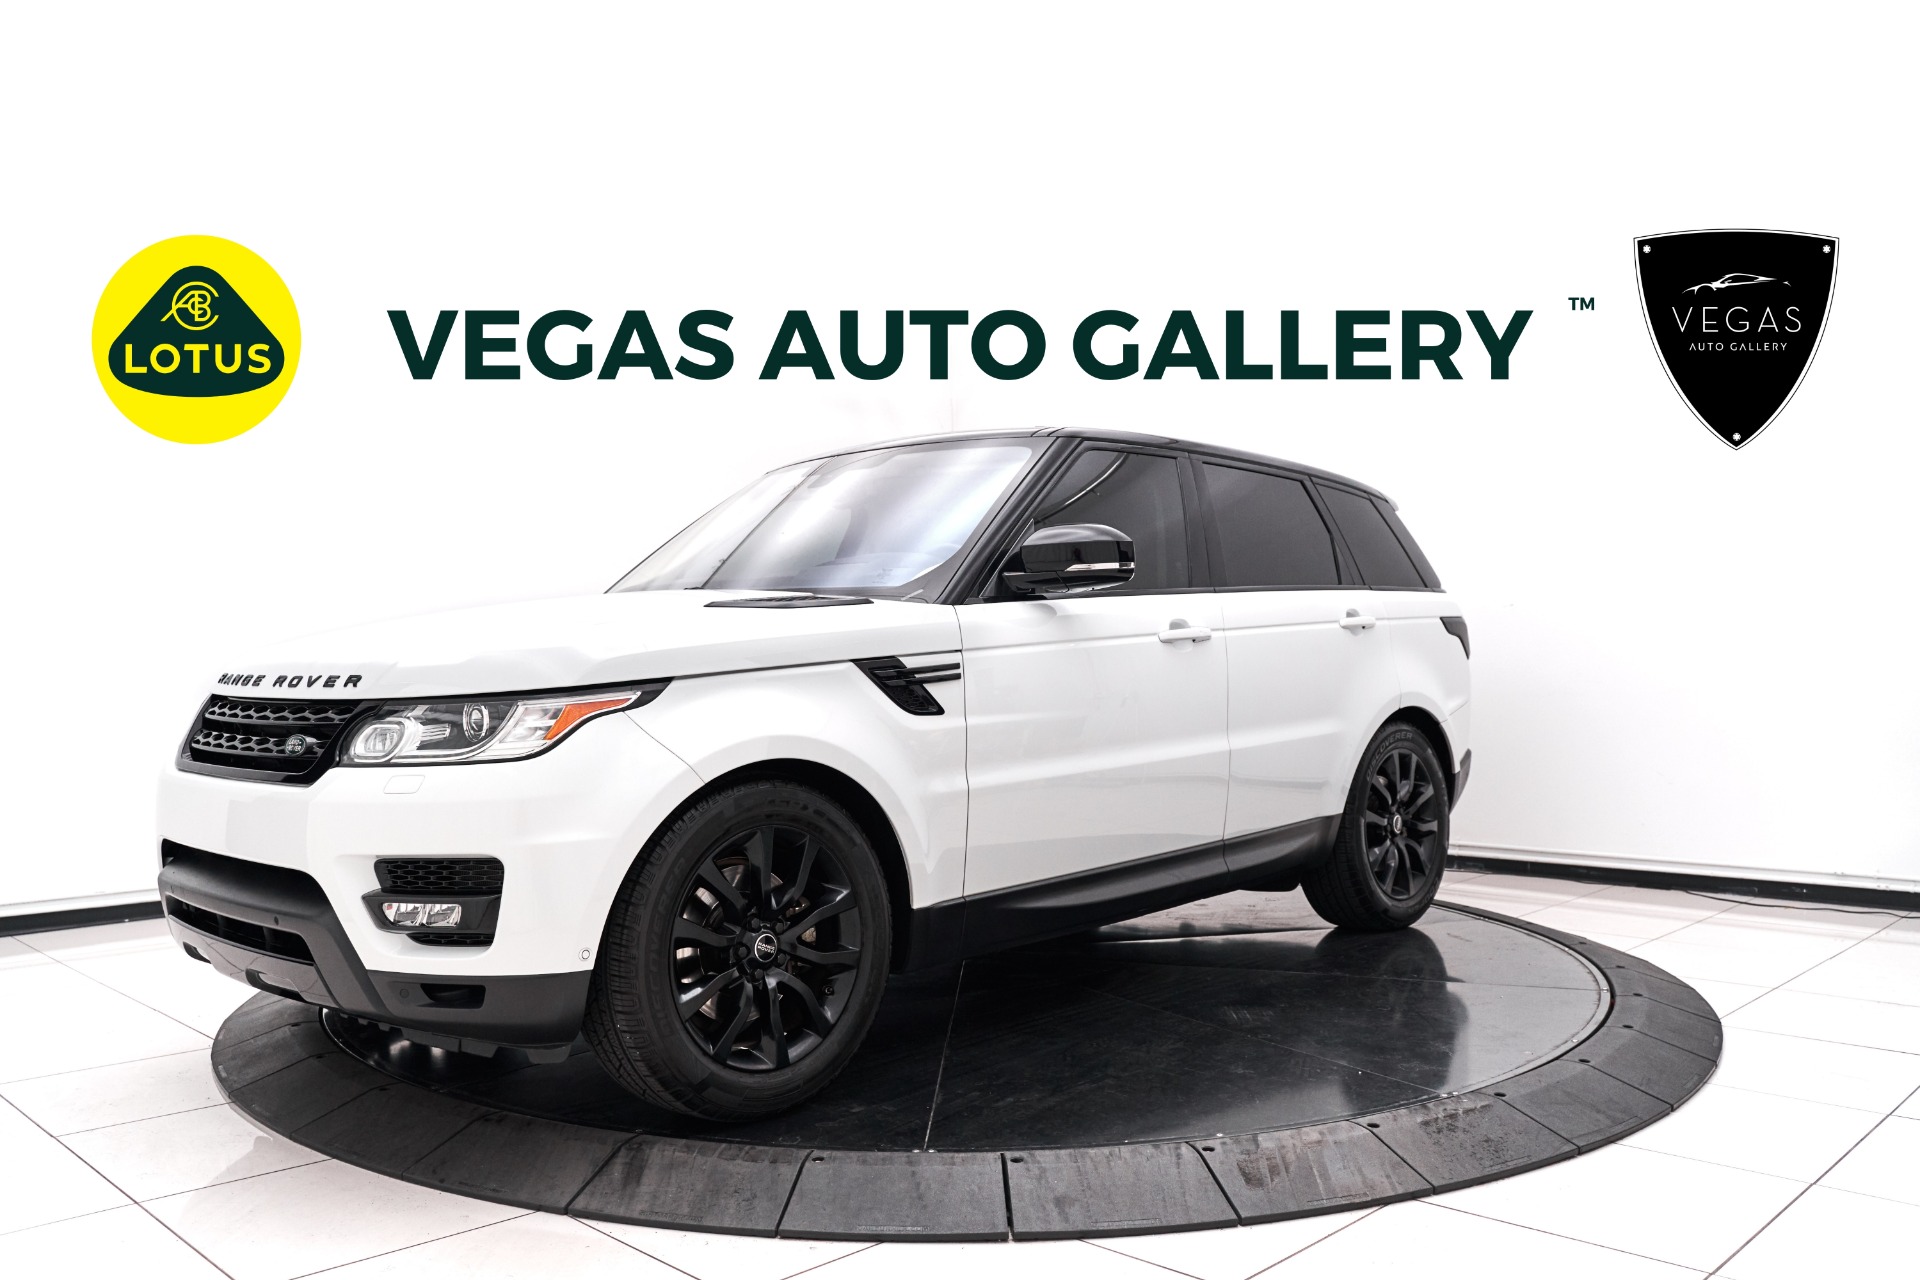 2016 Land Rover Range Rover Sport 3.0L V6 HSE For Sale | Lotus Cars Vegas Stock #574468A